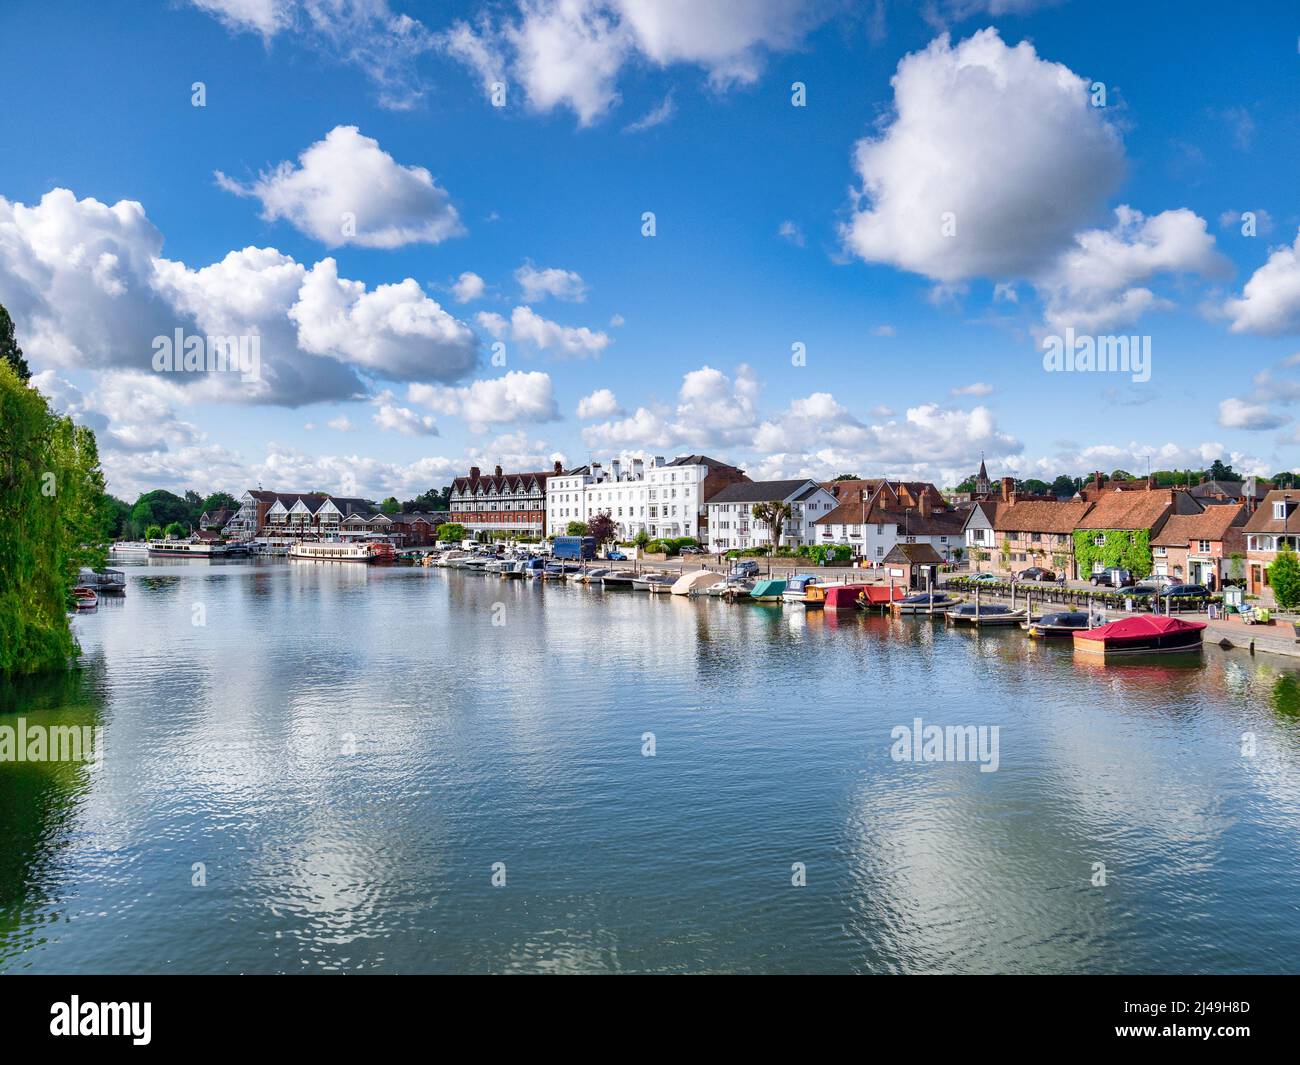 6 June 2019: Henley on Thames, UK - The River Thames, where it is lined by beautiful old buildings, with summer sky reflected in the water. Stock Photo